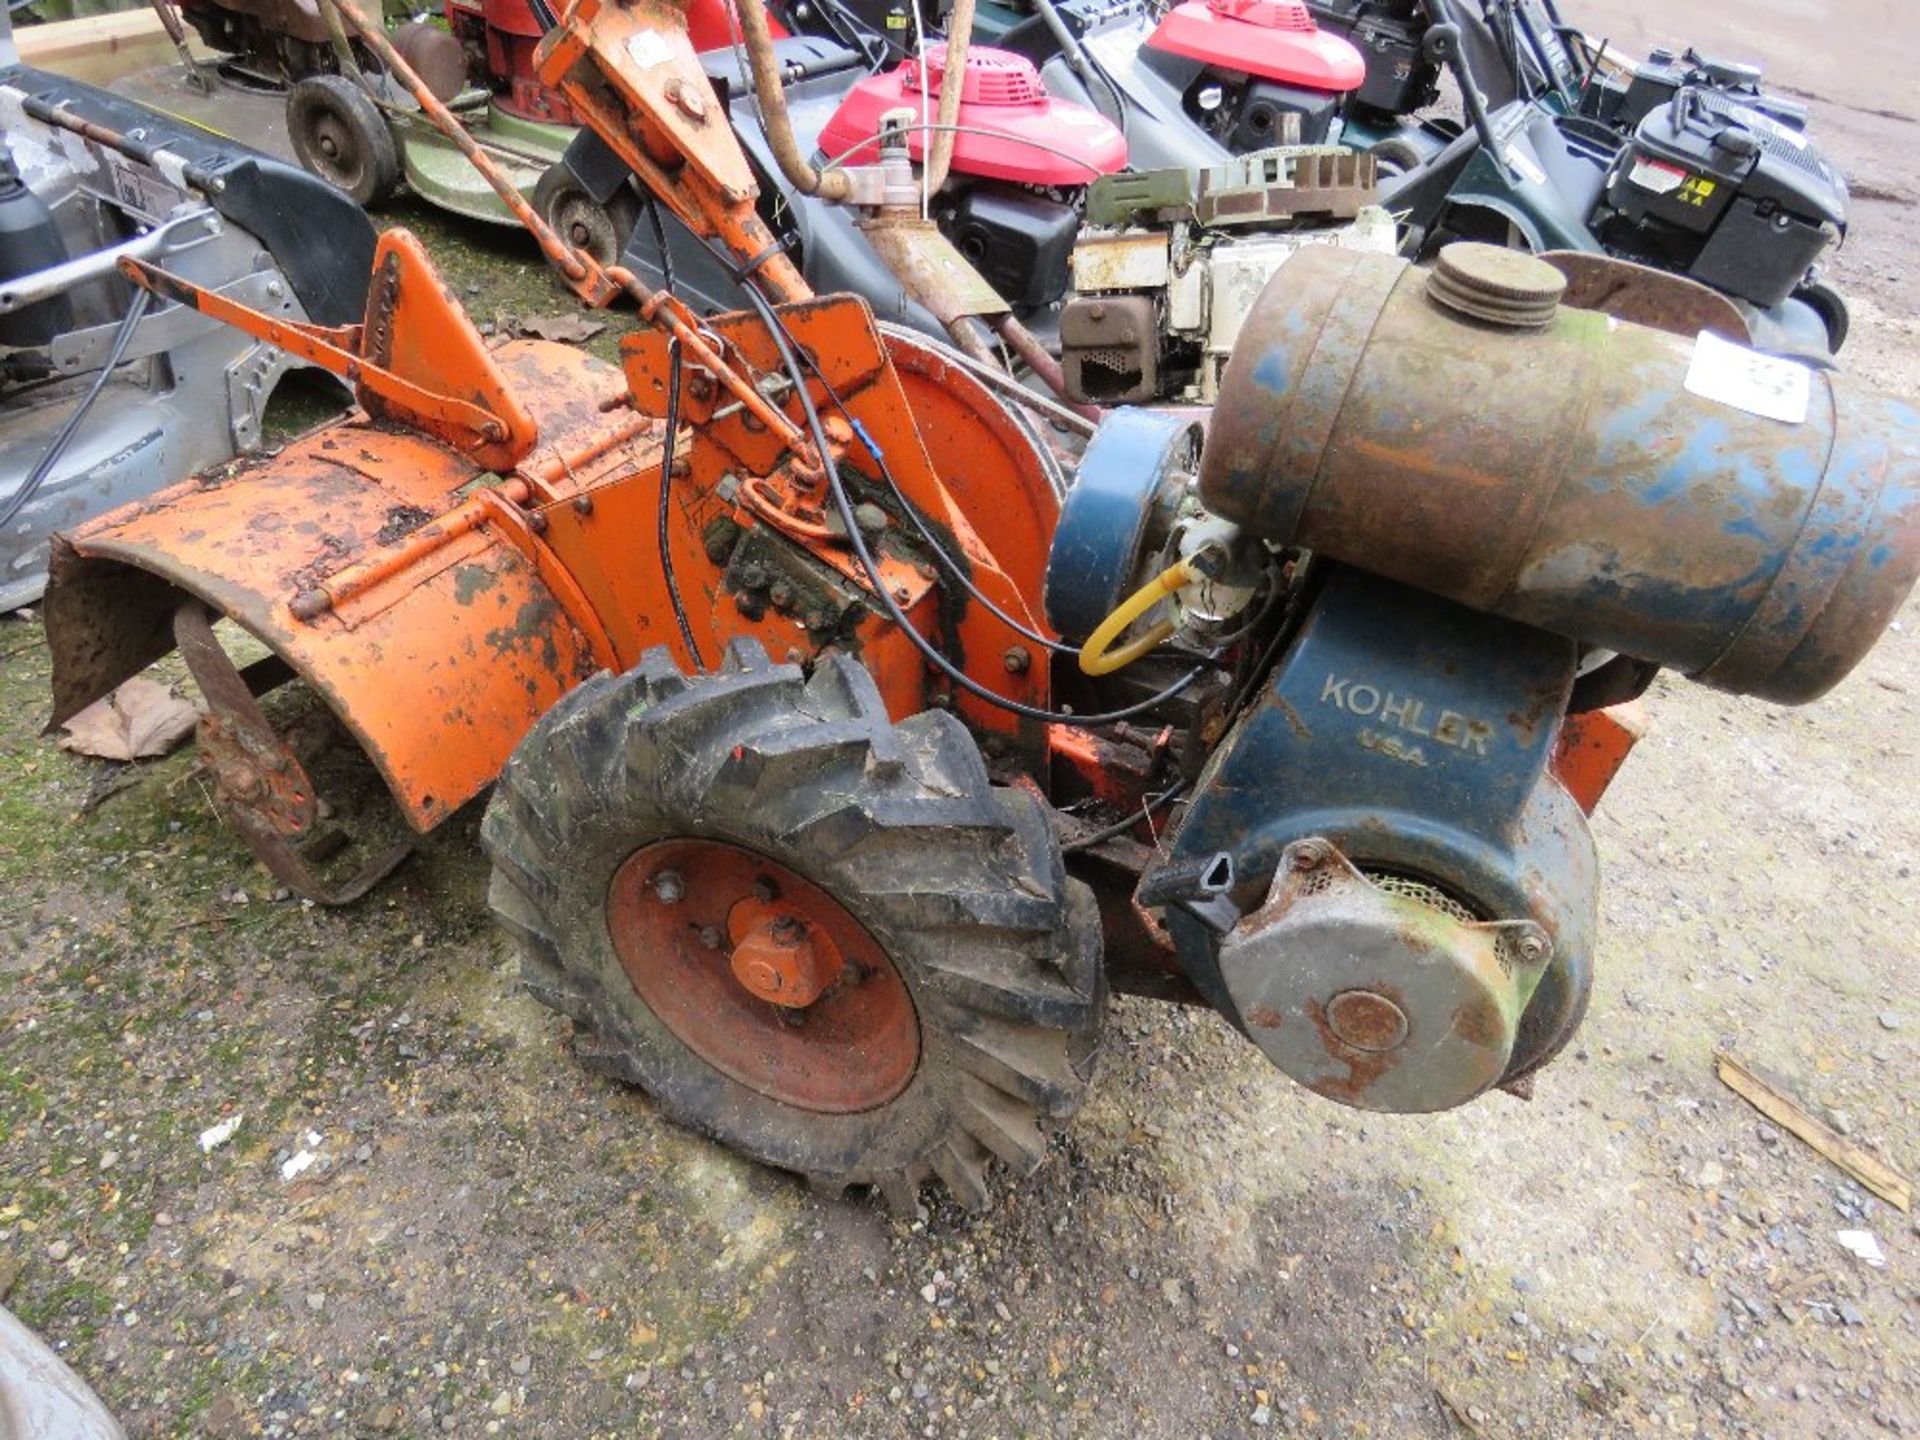 HOWARD 300 PETROL ROTORVATOR PLUS A MOUNTFIELD CHASSIS....THIS LOT IS SOLD UNDER THE AUCTIONEERS MAR